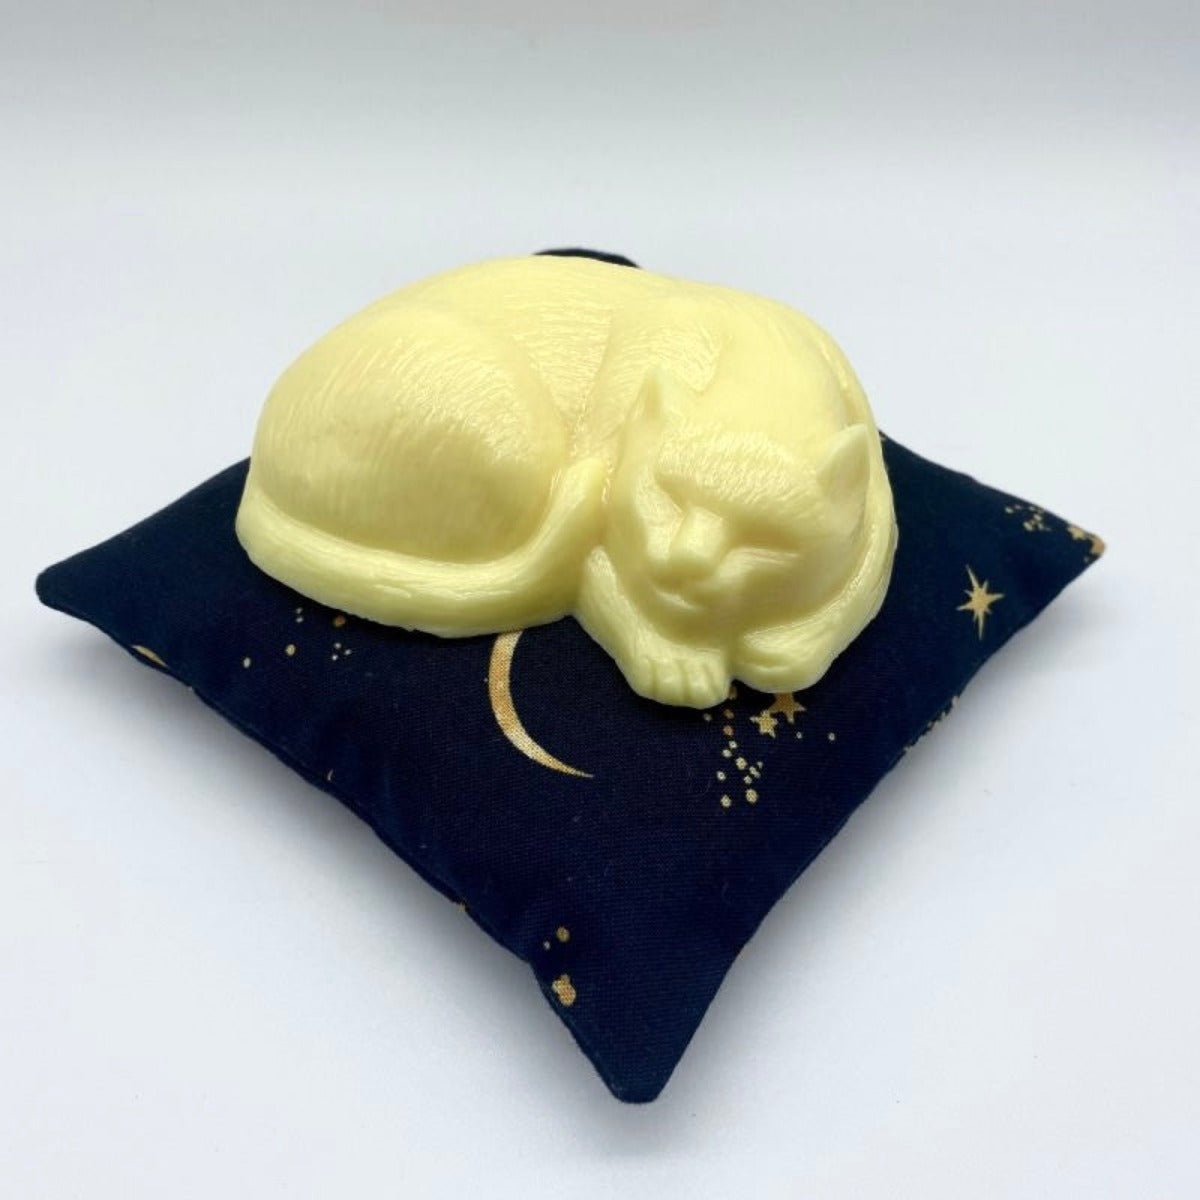 Mindfully sleeping yellow cat-shaped soap, representing the essence of mindful beauty, resting on a celestial navy blue pillow with stars